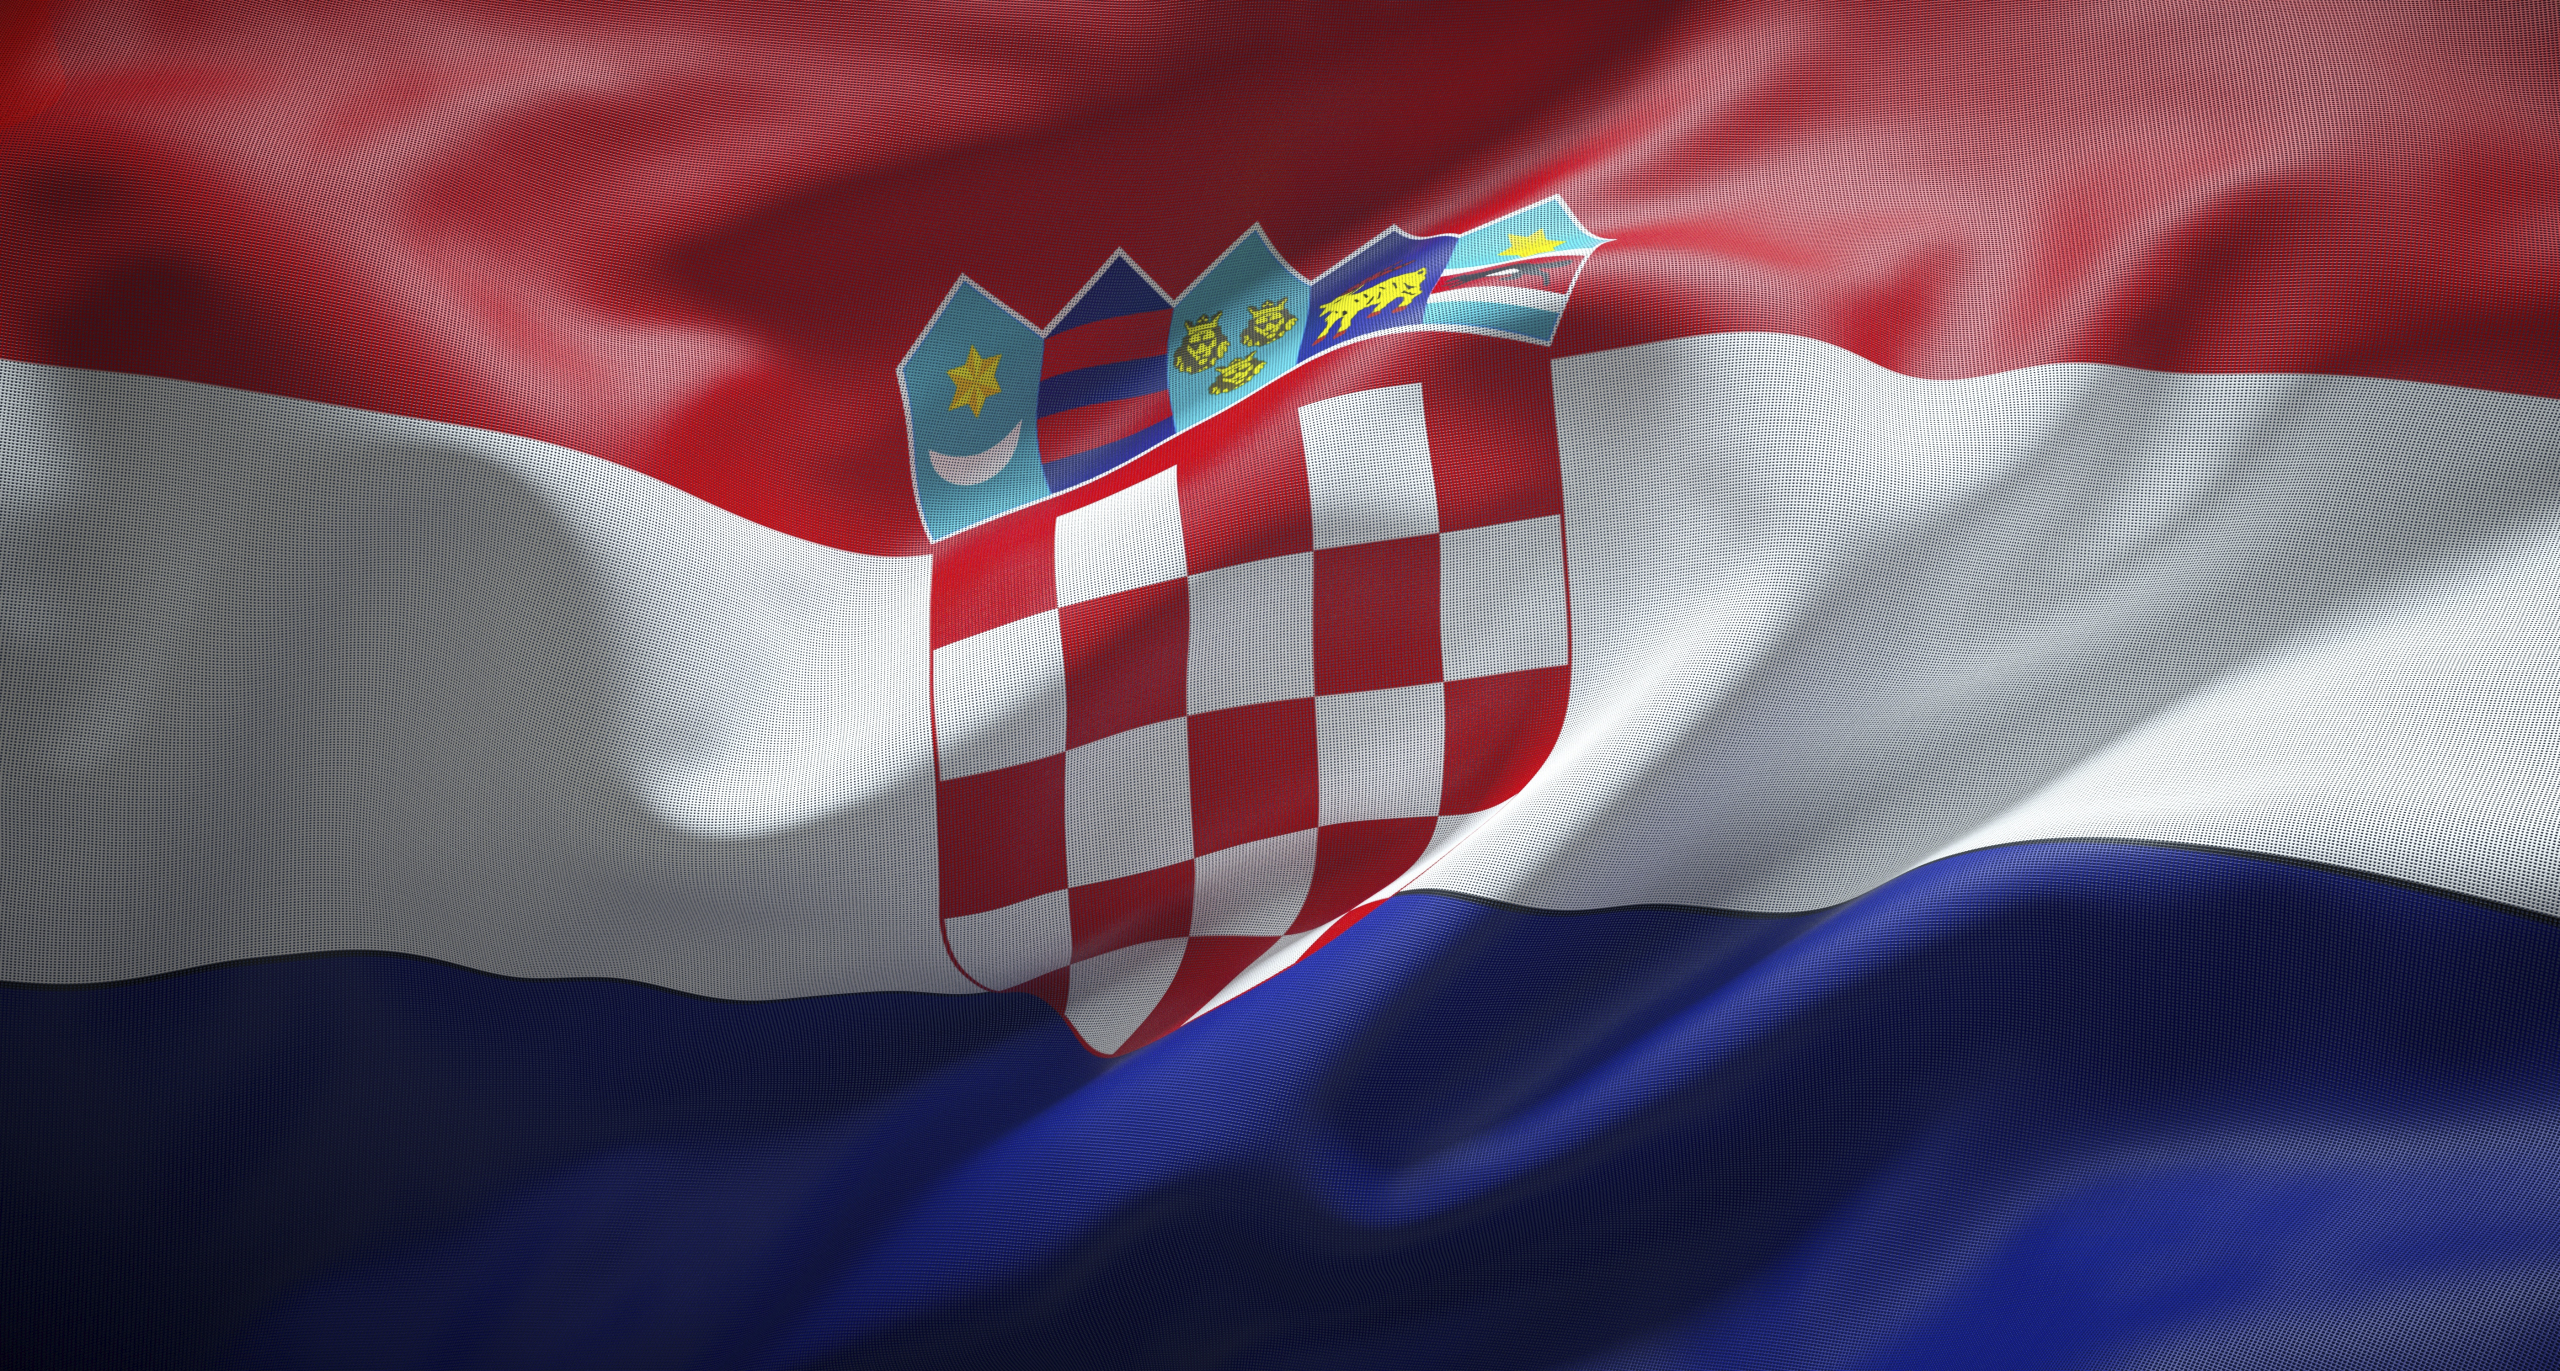 Croatian Elections: Ruling Party Likely to Stay in Power, Presidential Gamble Did Not Pay Off